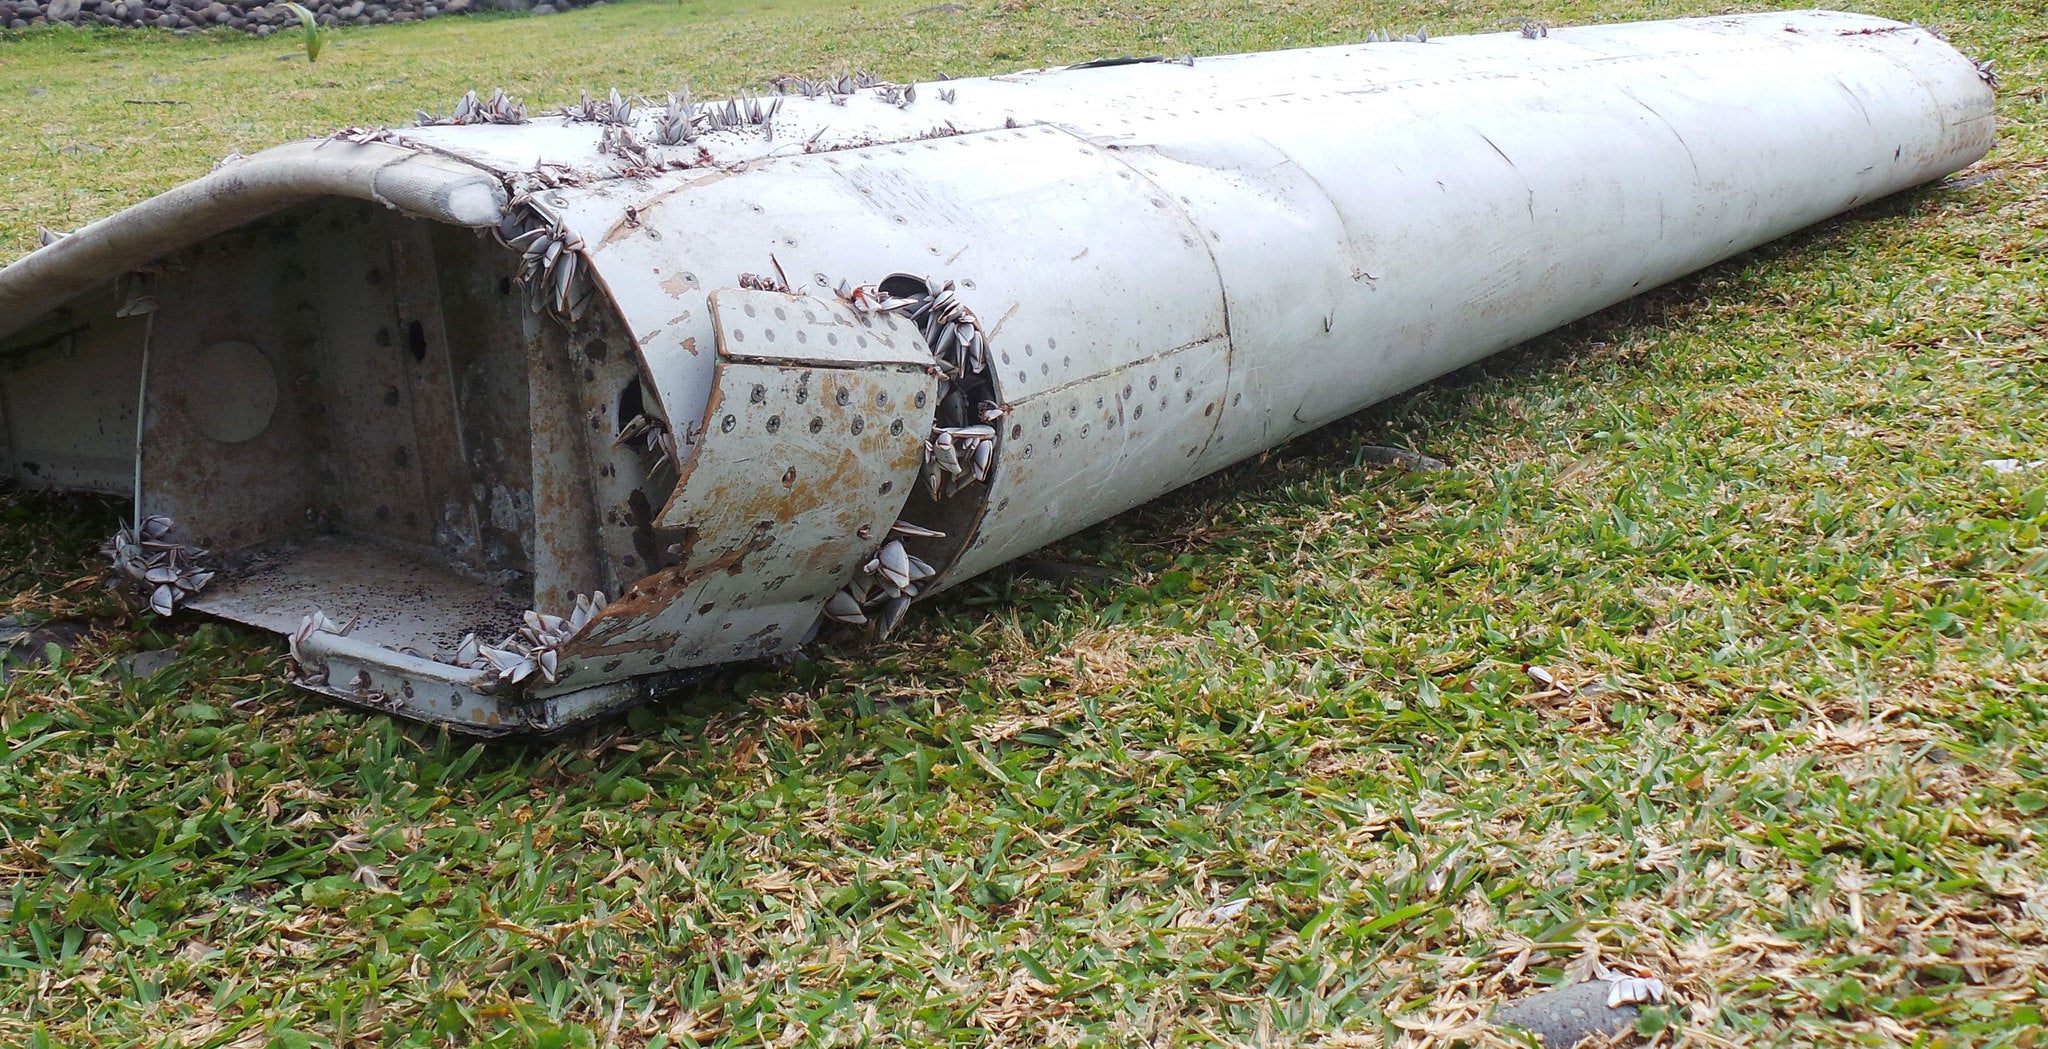 Aircraft wreckage on the French island of Reunion in the Indian Ocean